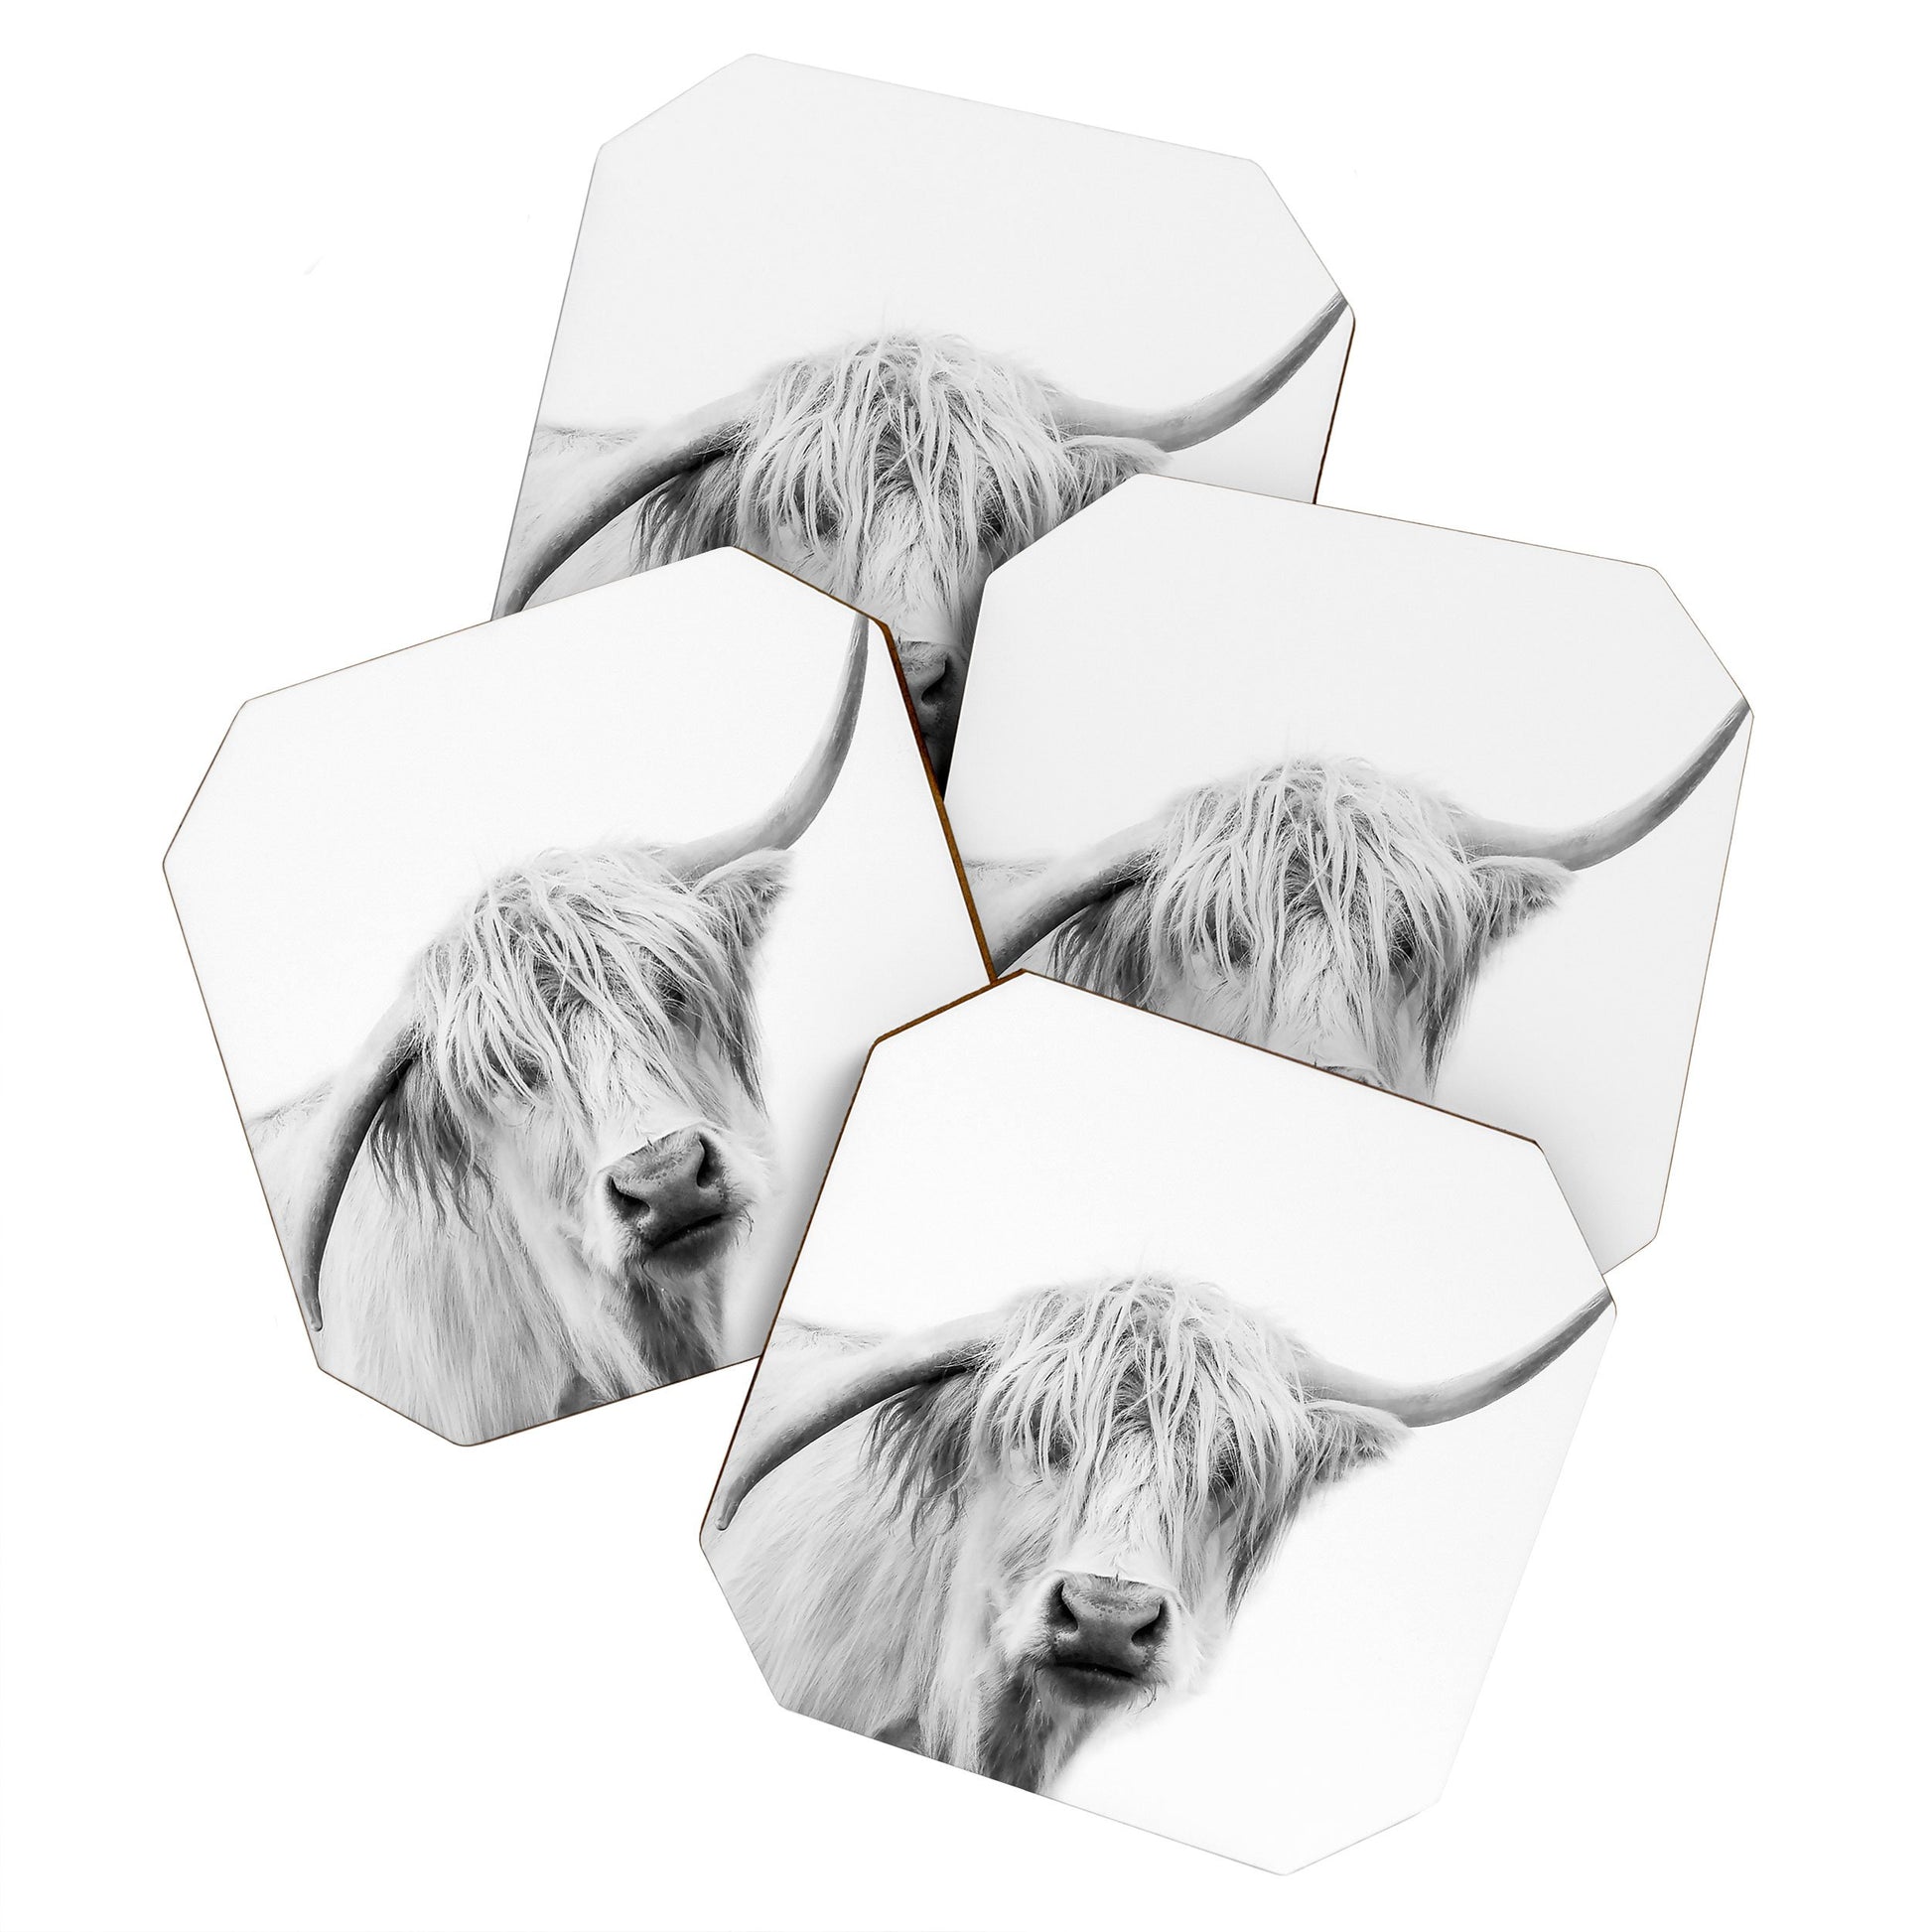 Highland Coaster Set - black and white, bull coaster, coaster, coaster set, coasters, cow, cows, cowss, cute cows, decoration, gift, gift idead, gift ideas, hairy cows, high land, high land cow, highland, highland cow, highland cows, highlandbull, highlandcattle, highlandcow, highlandcows, highlander, highlanders, highlands, home, home decor, photo, photography, rustic coasters, western, western home decor -  - Baha Ranch Western Wear